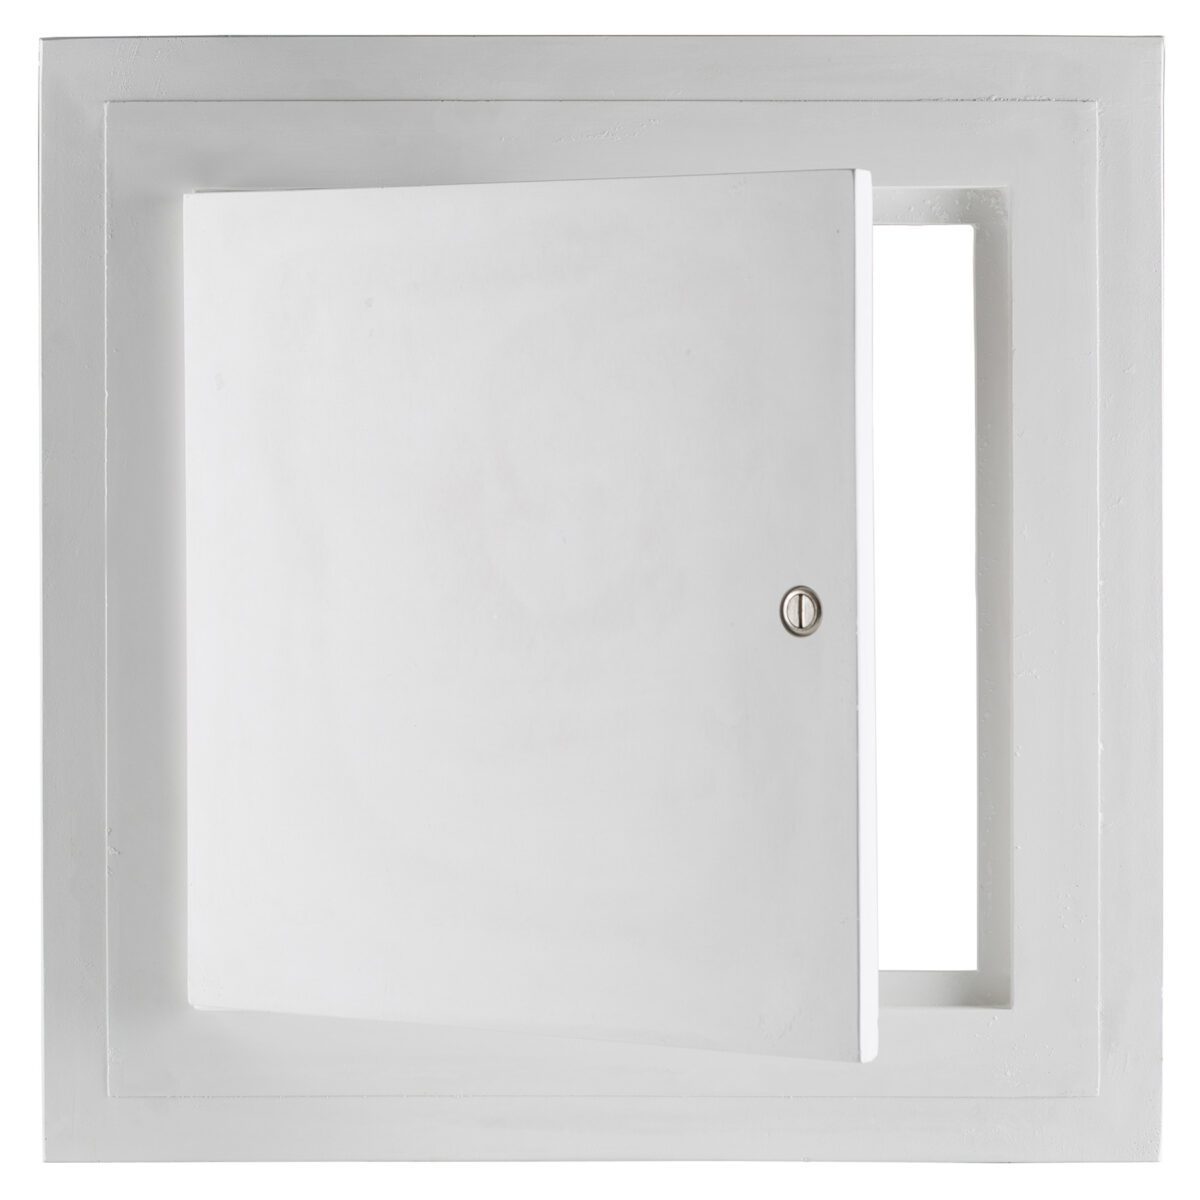 GFRG – hinged square corner – comes with cam-latch